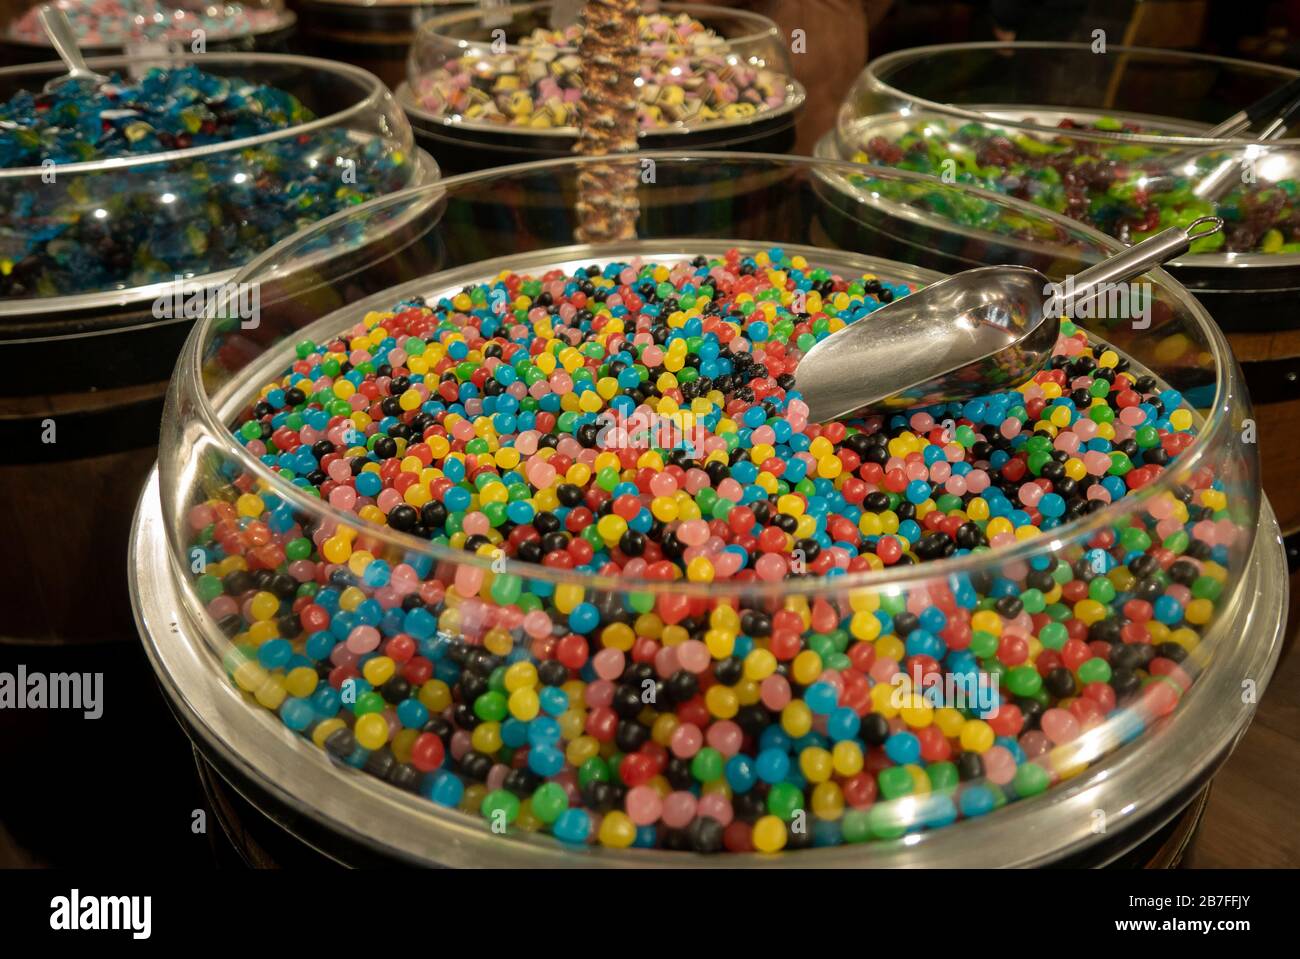 Colorful sweets for sale Stock Photo